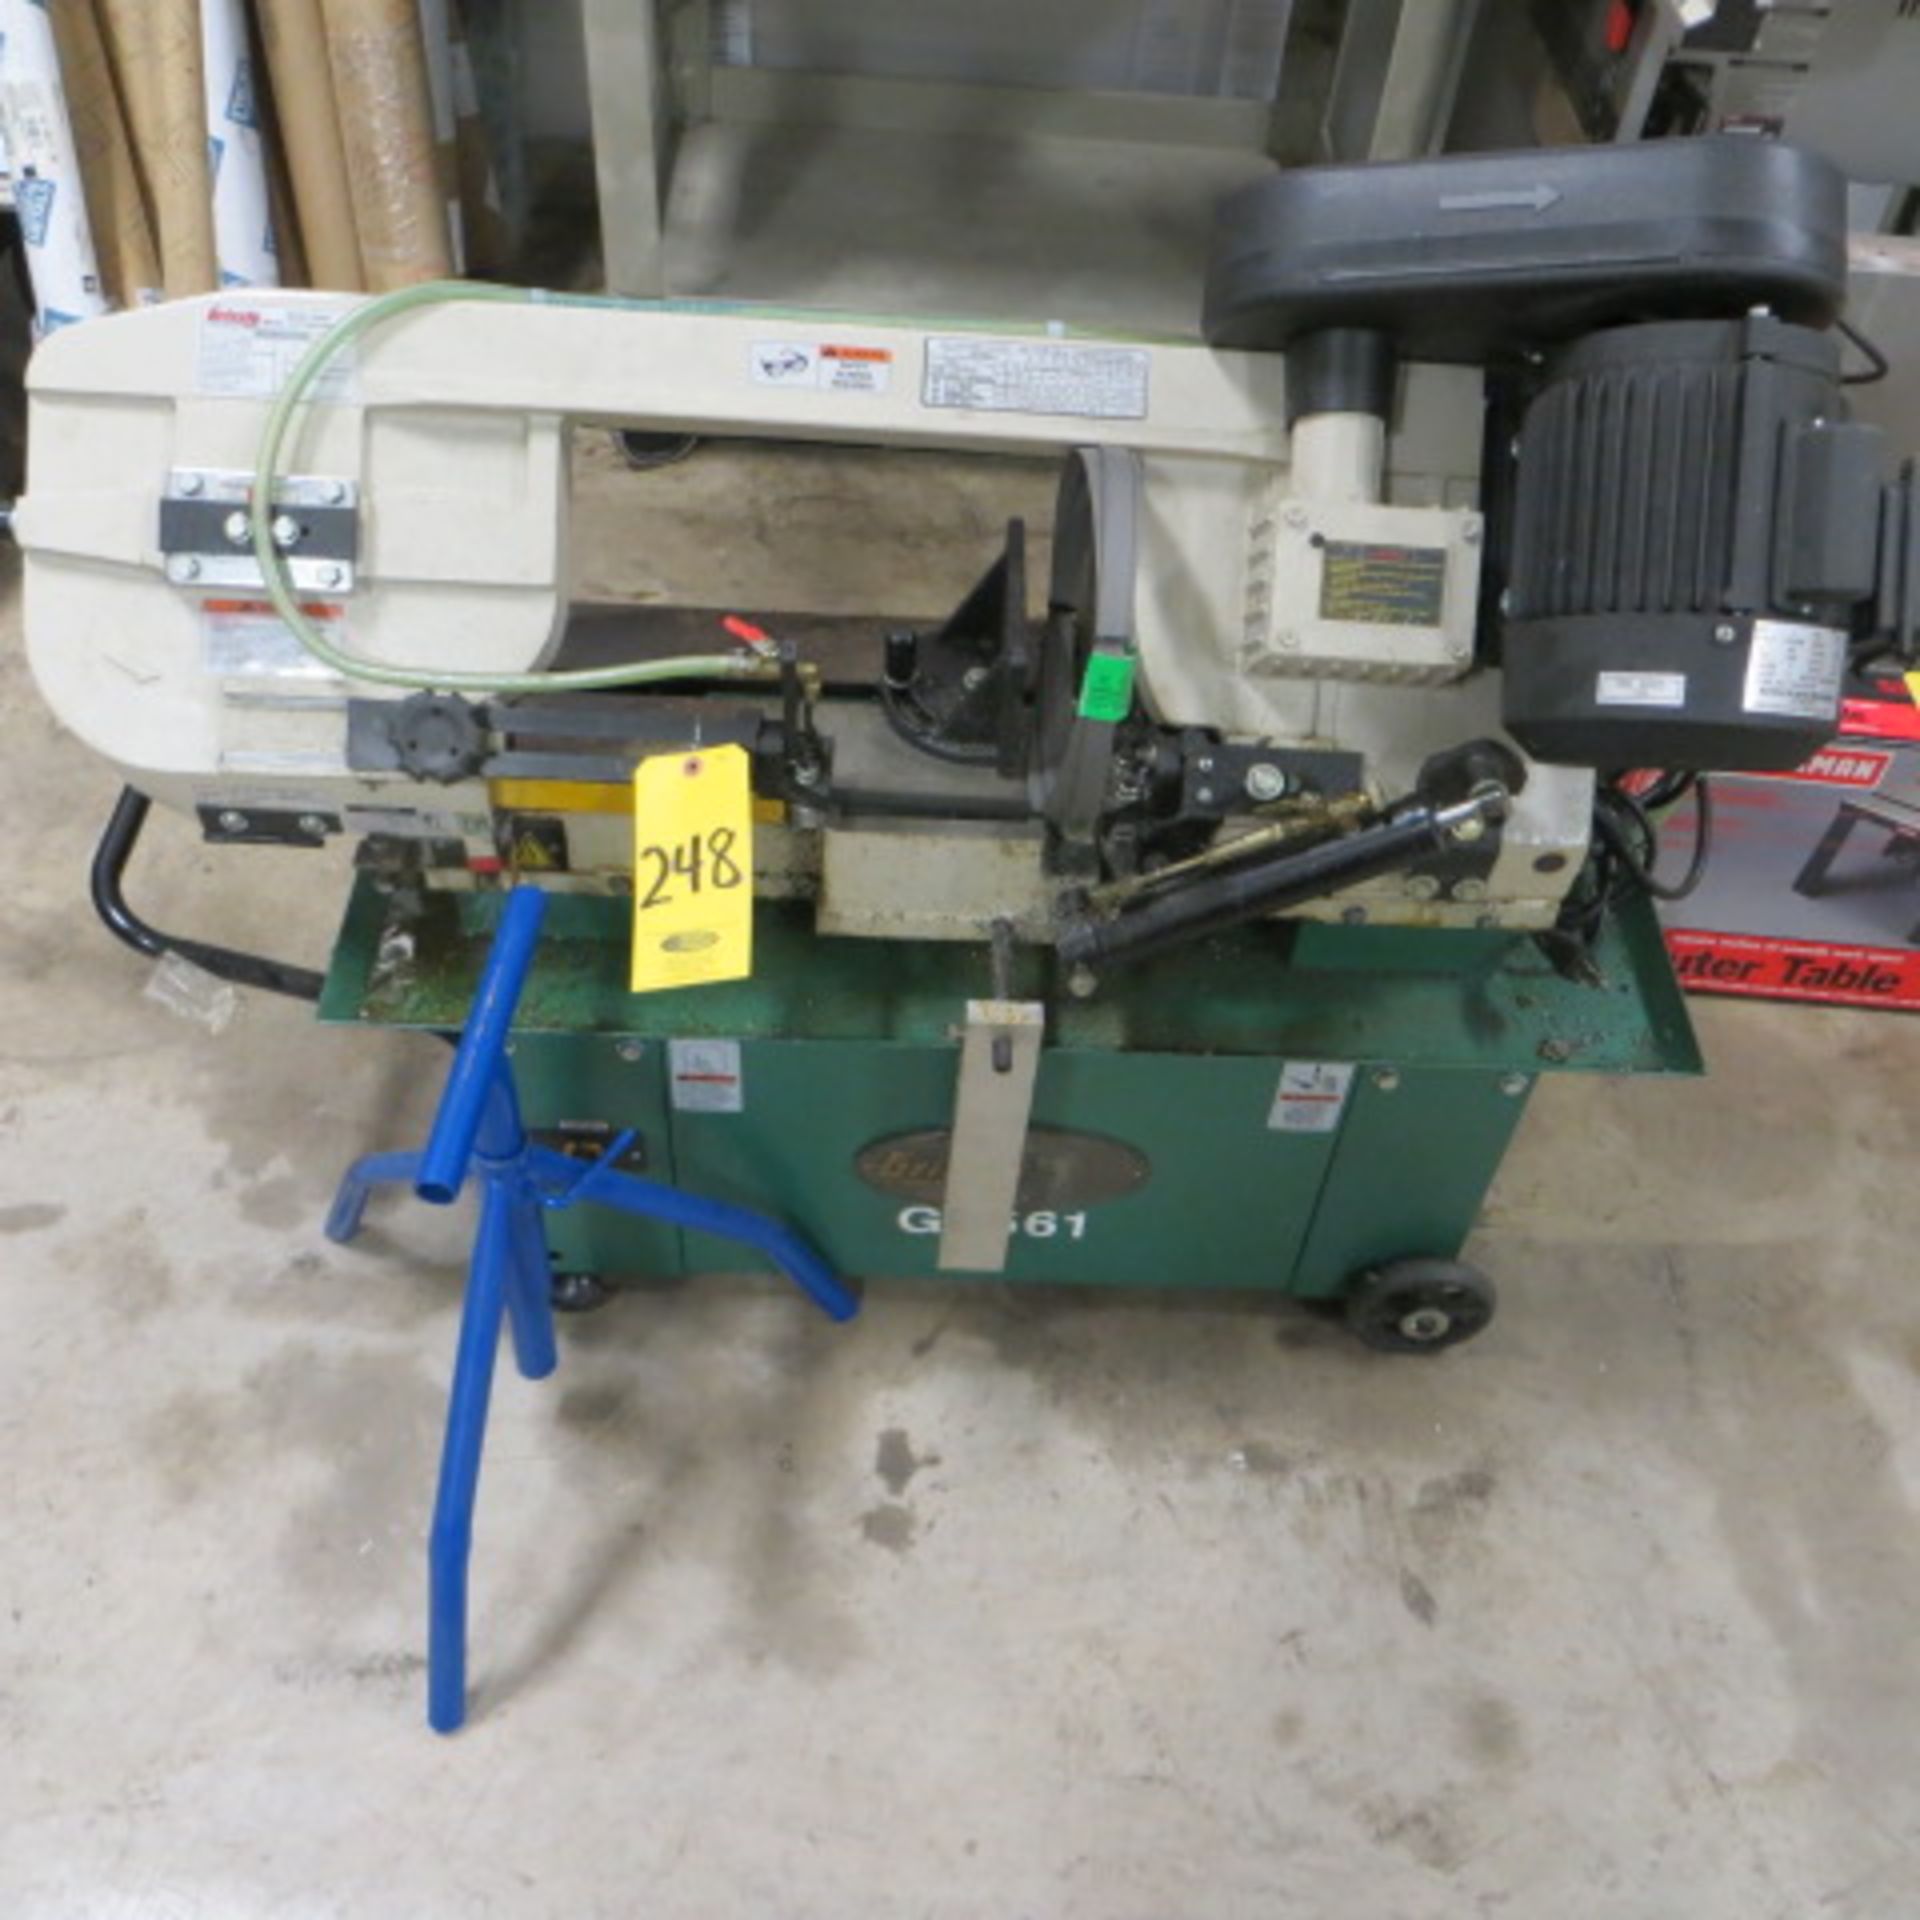 GRIZZLY GO561 HORIZONTAL METAL BAND SAW 7 X 12 WITH STAND